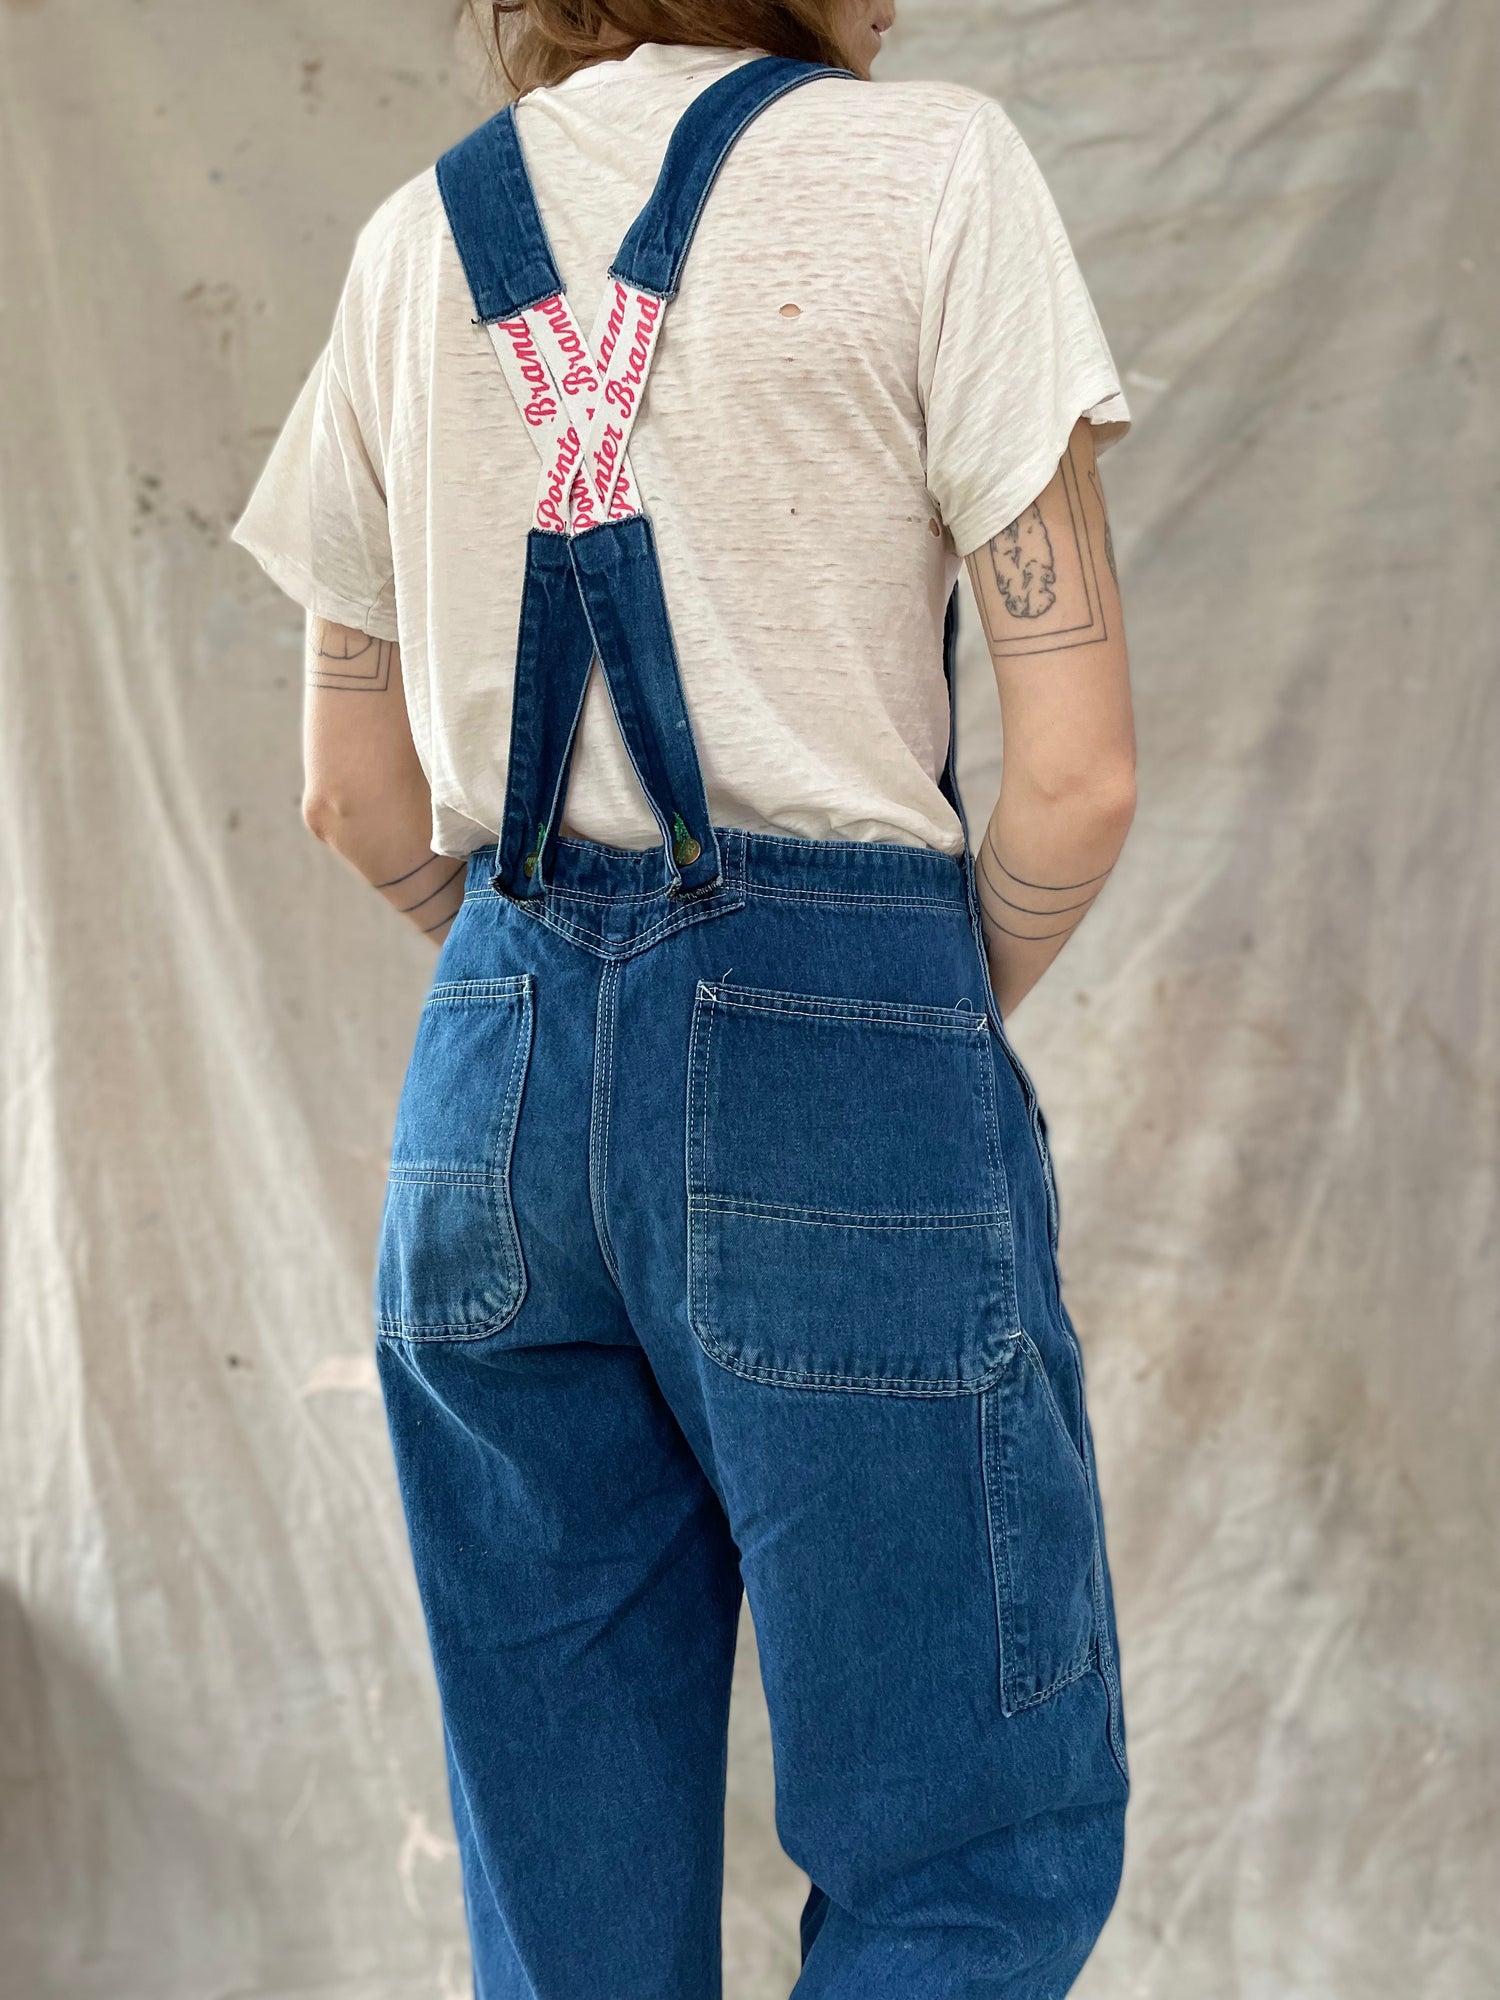 Vintage Pointer Brand Low Back Stitch Patched Denim Overalls Fade Distress  36 - La Paz County Sheriff's Office Dedicated to Service